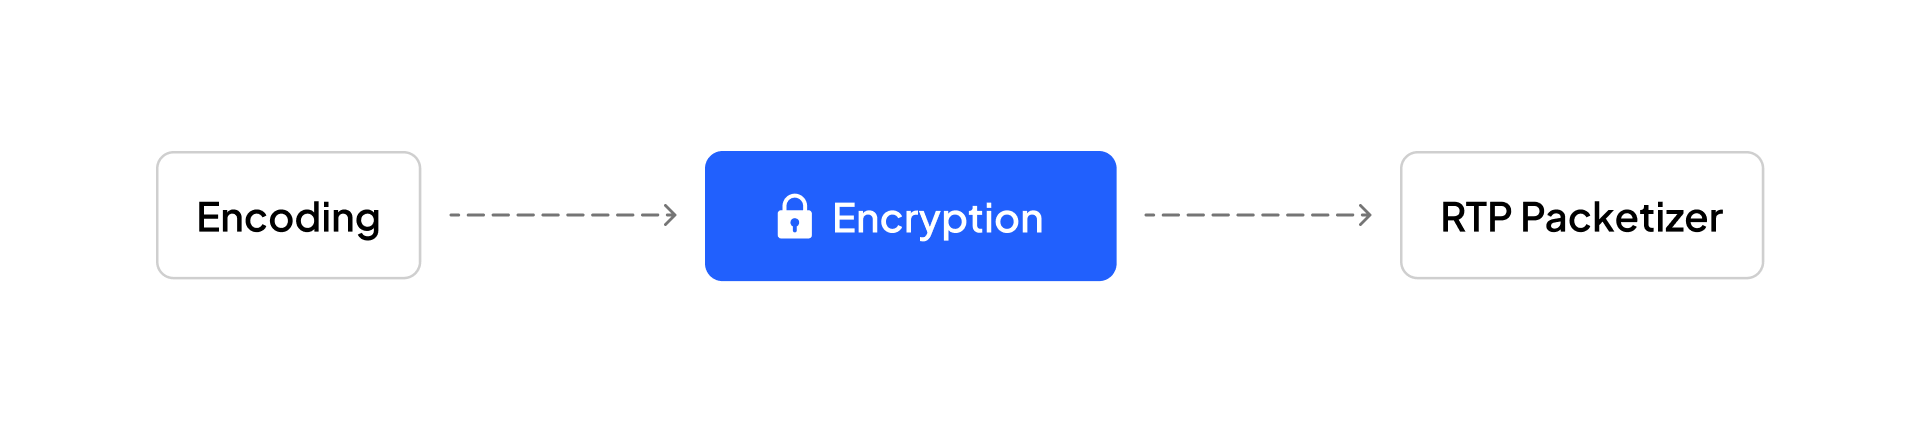 Implementing End-to-End Encryption (E2EE)